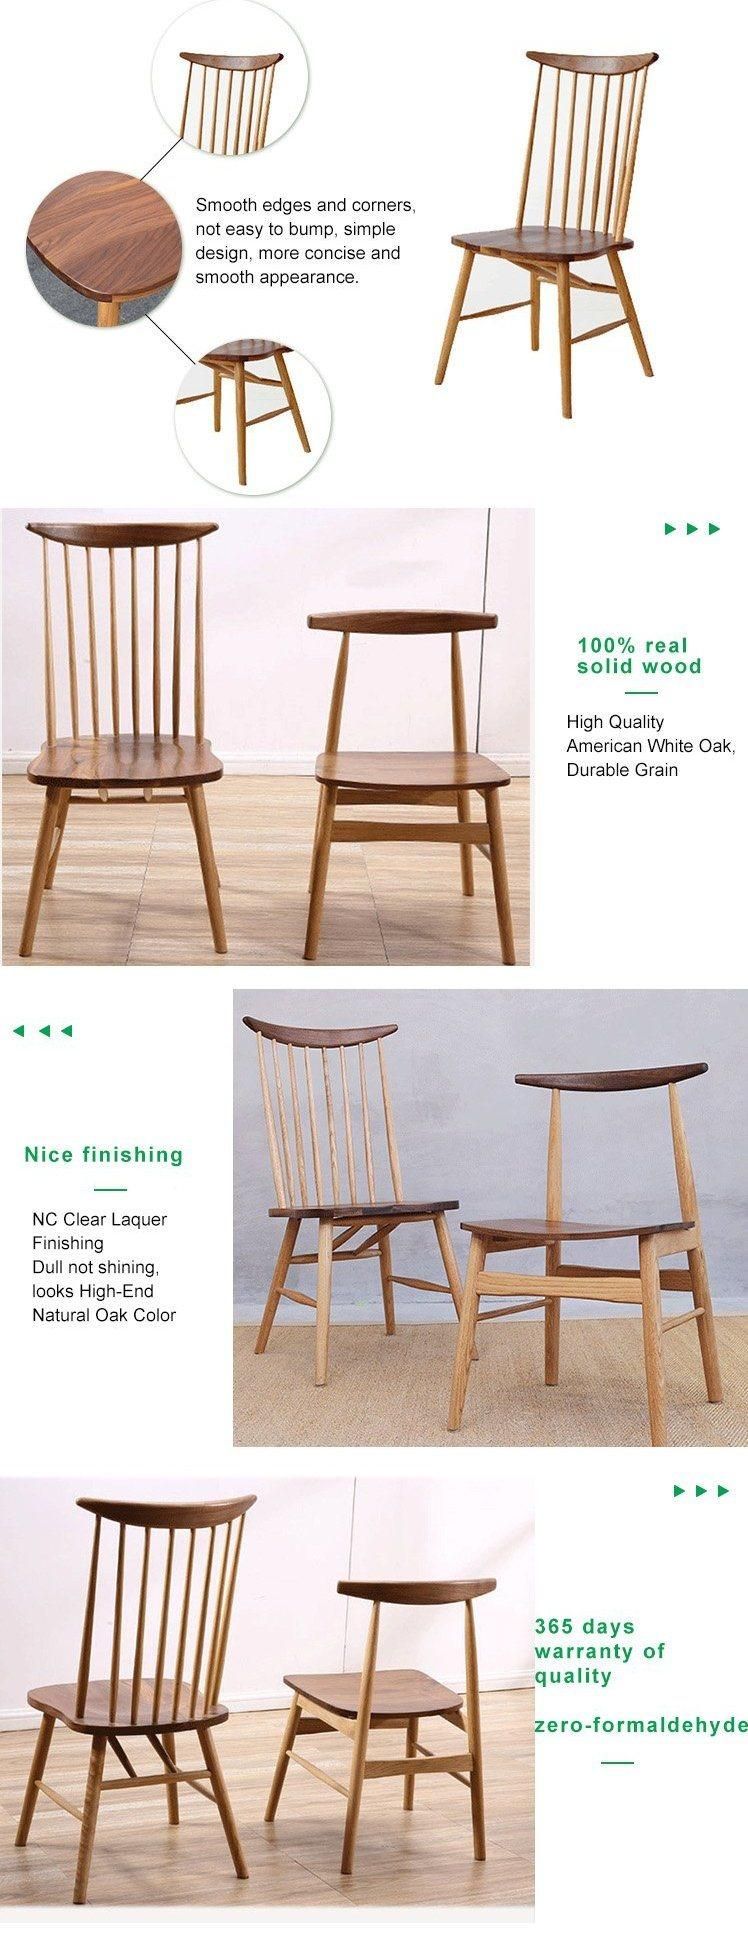 Furniture Modern Furniture Chair Home Furniture Wooden Furniture High Quality Contemporary Solid Oak Wood Design High Back Windsor Dining Room Chair